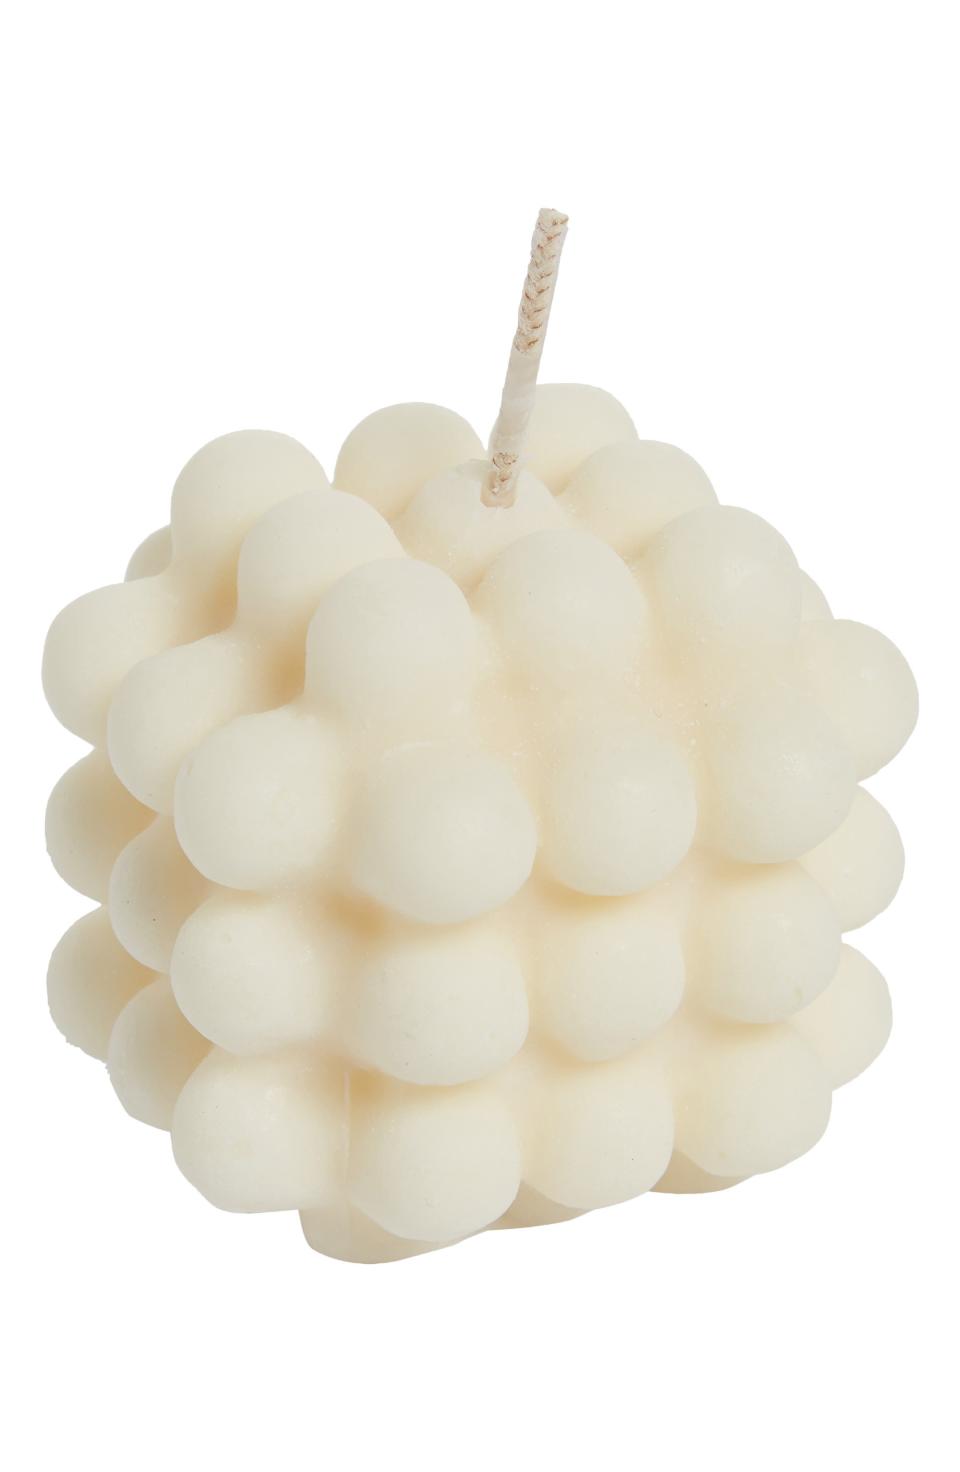 13) Bubble Candle